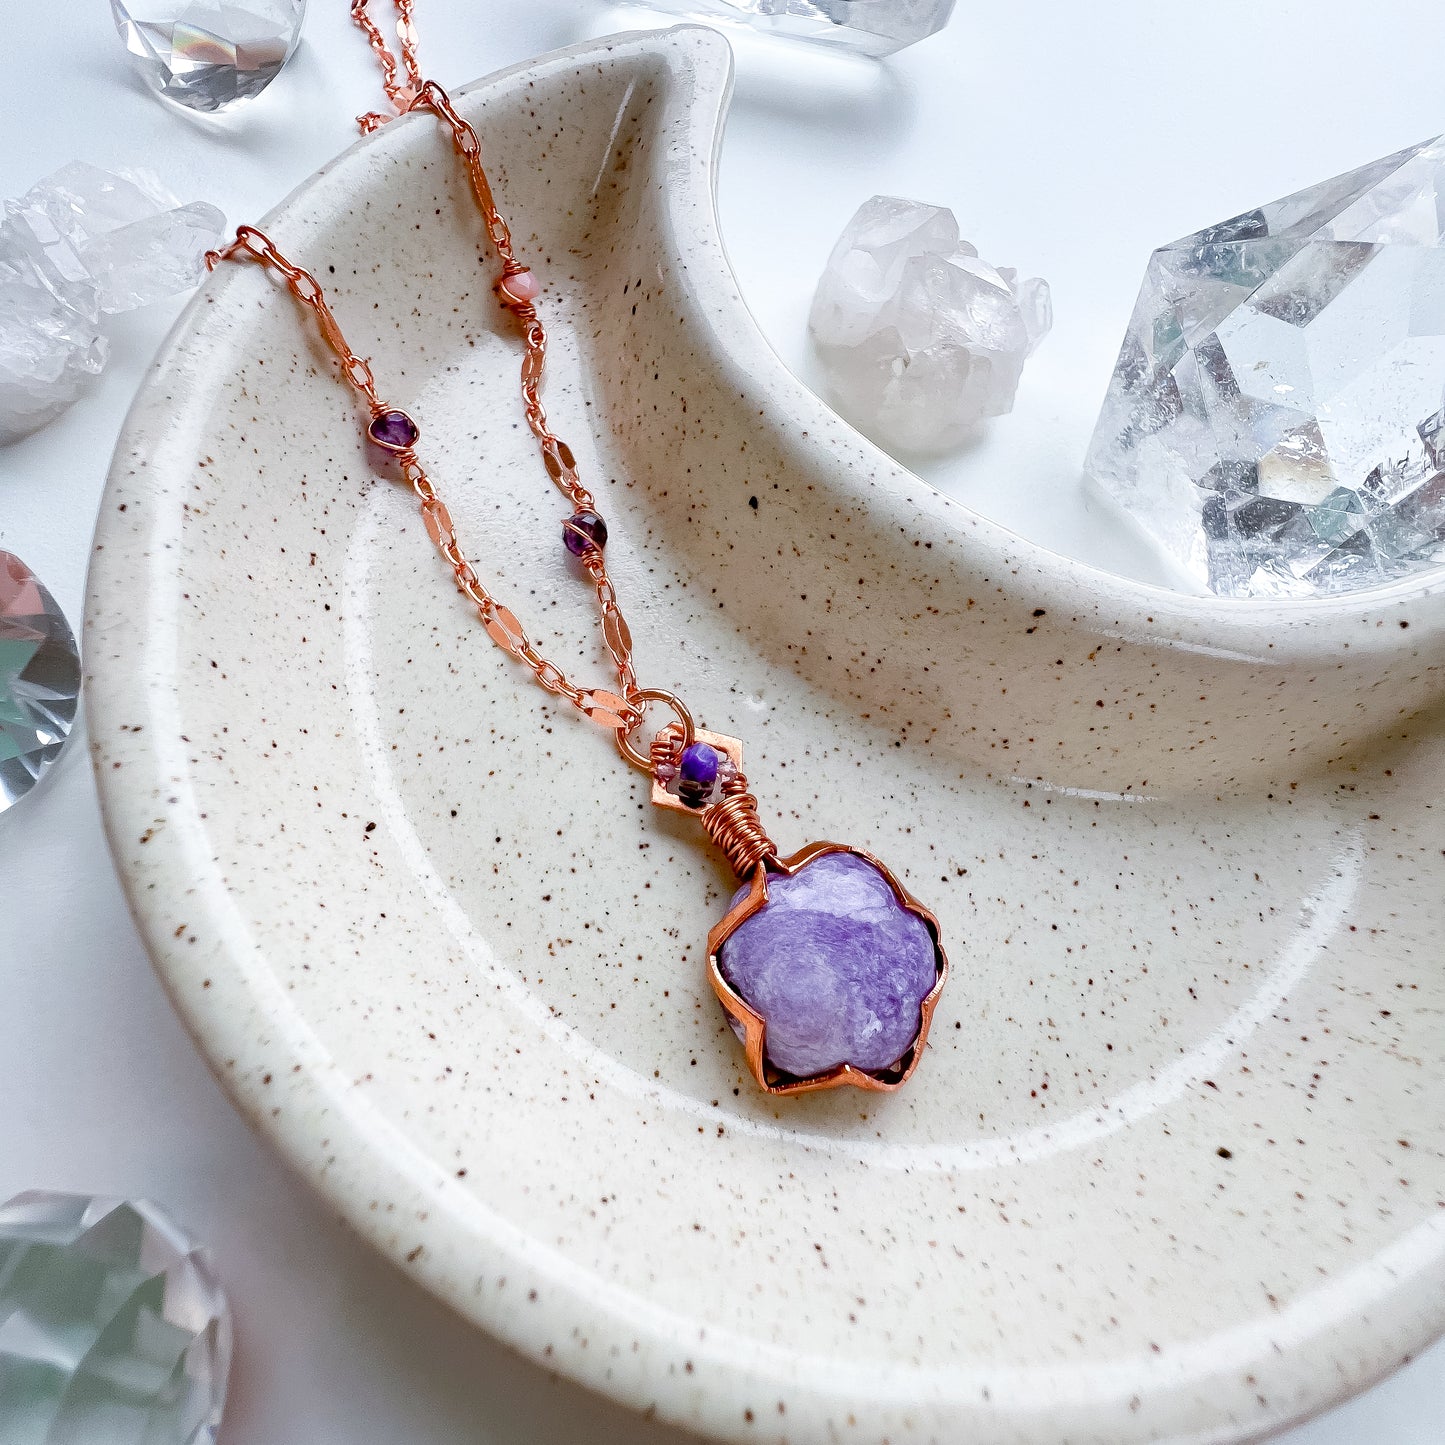 Charoite Necklace - Uniting spirit, heart and healing.